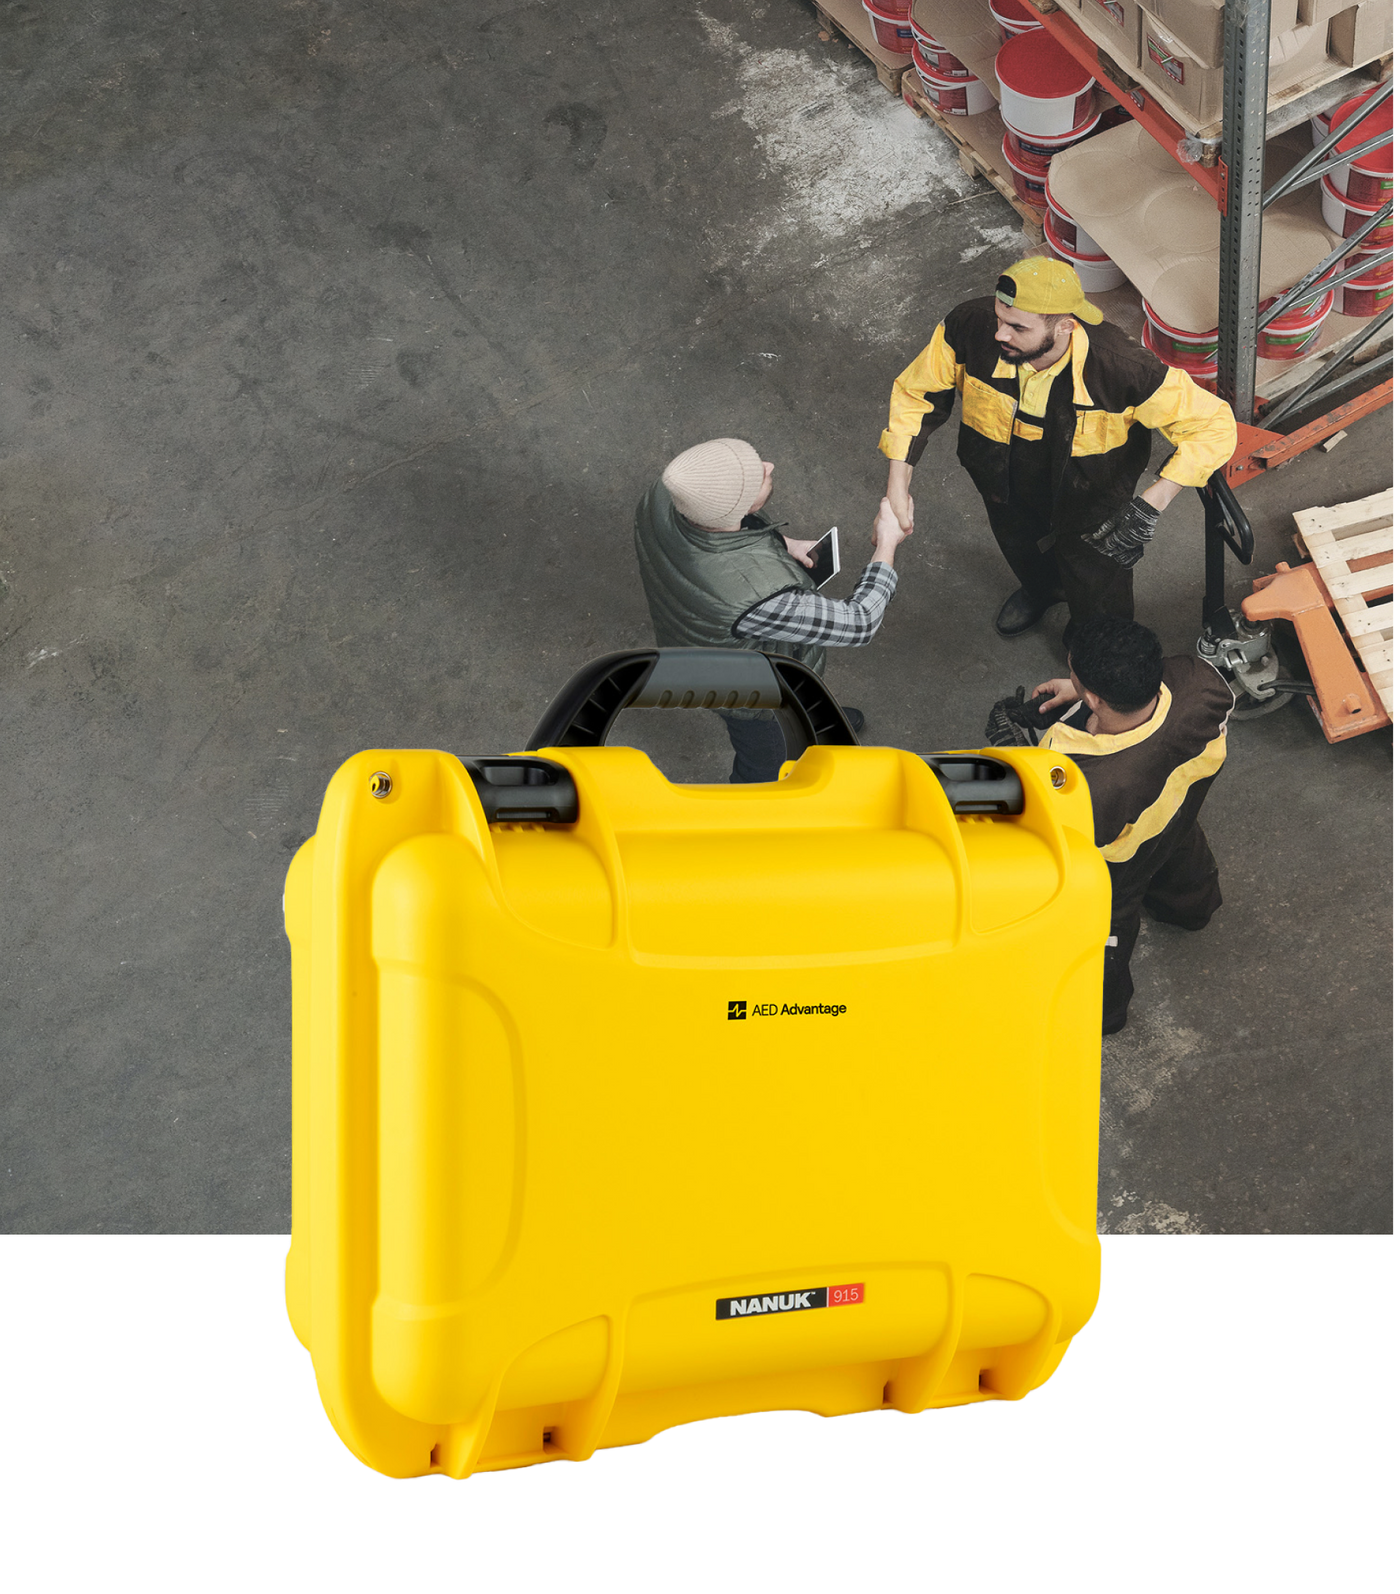 People working in a warehouse with a bright yellow AED carry case in front